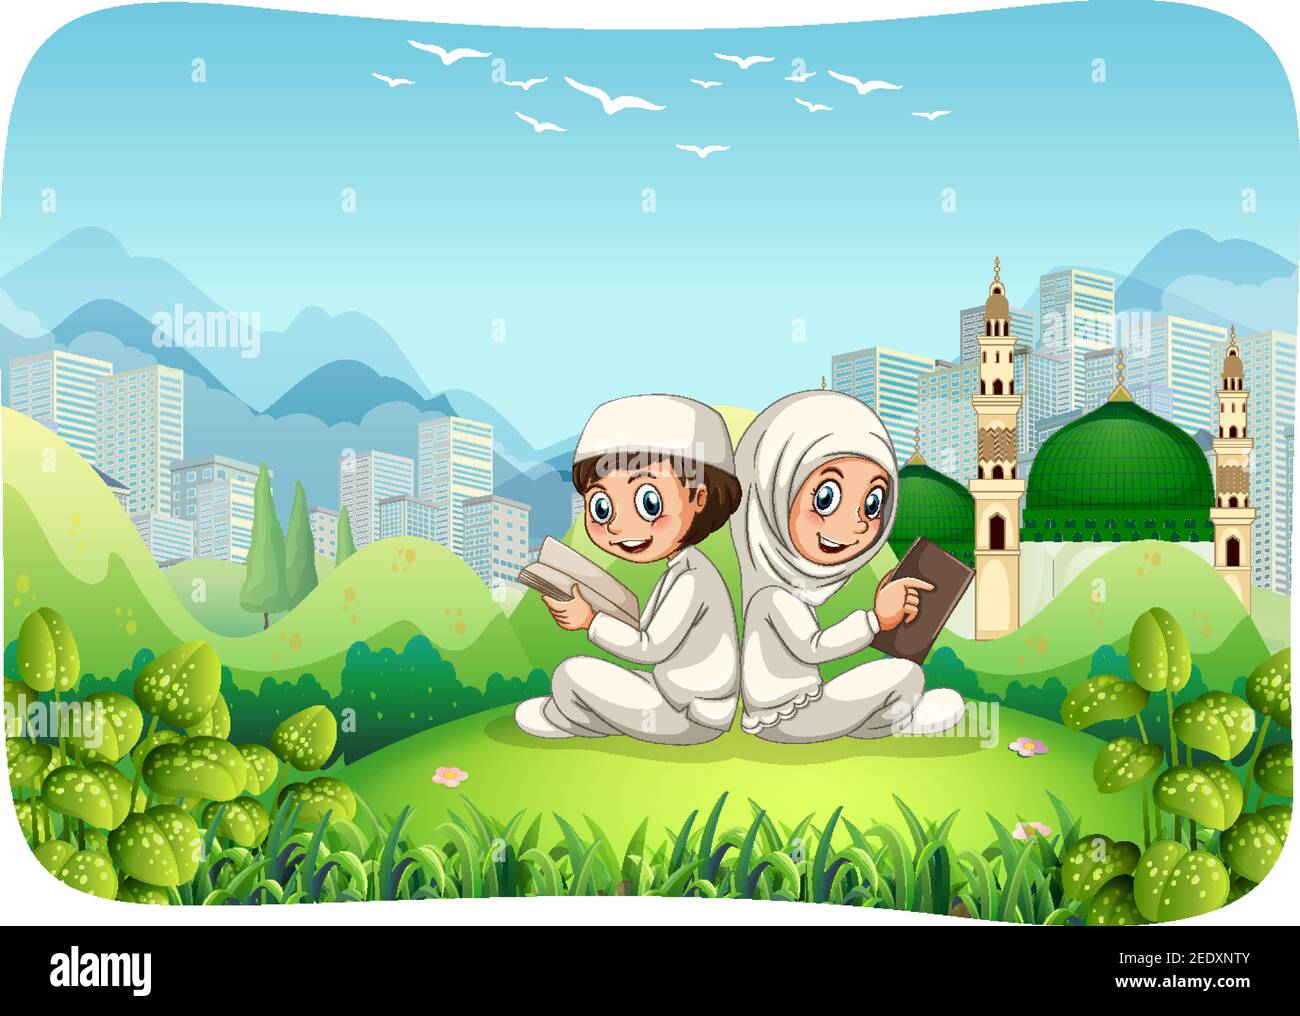 Park outdoor scene with muslim sister and brother cartoon character illustration Stock Vector